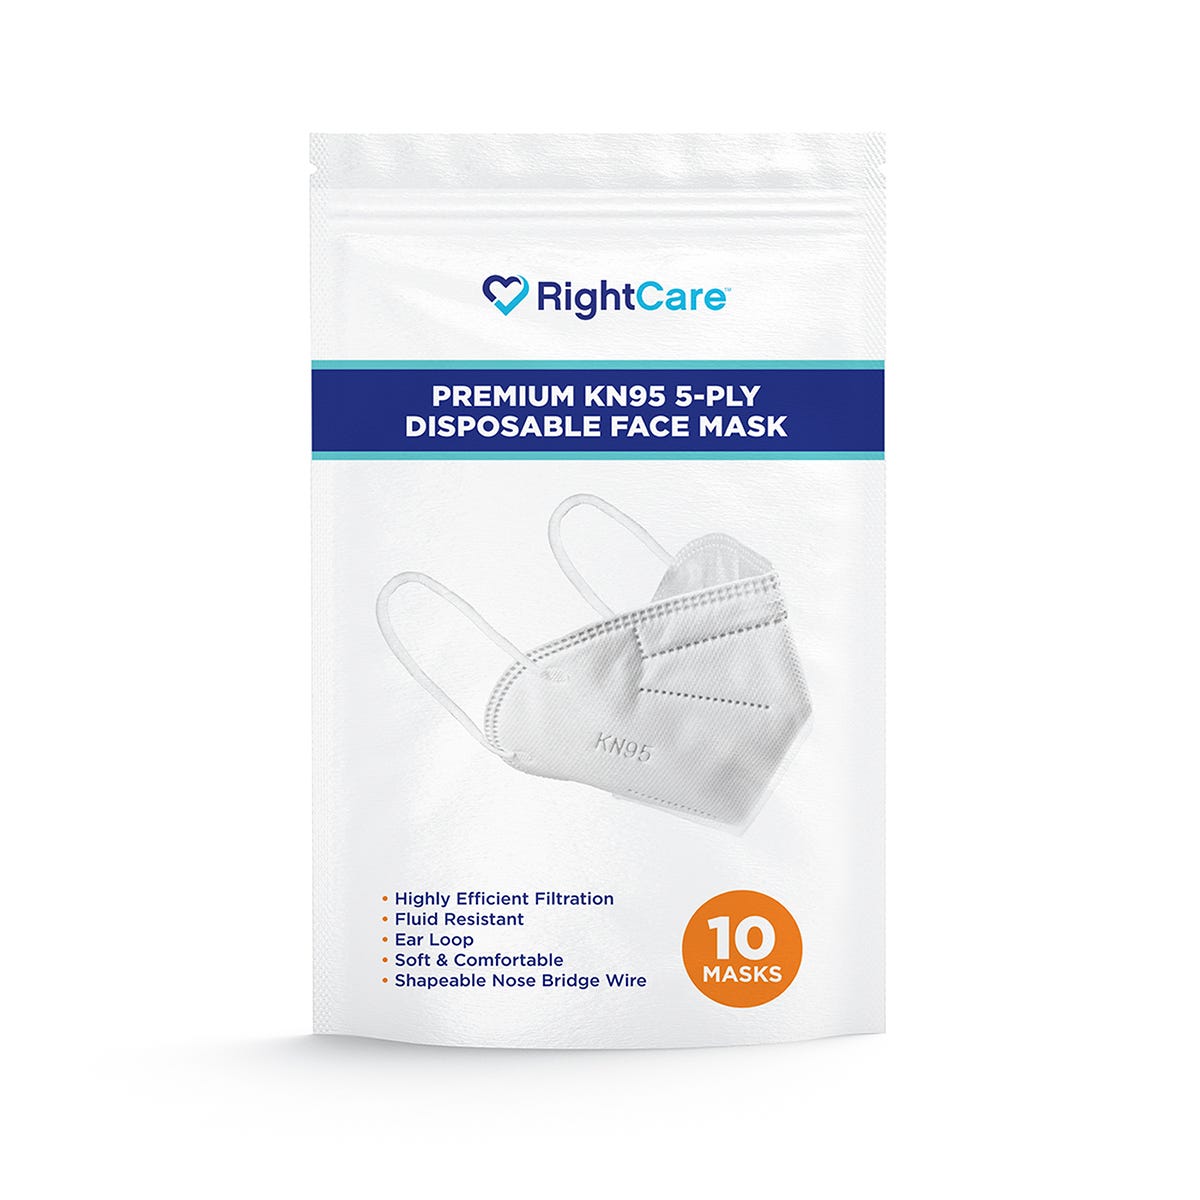 RightCare CGM Adhesive Patch made with KT Tape, Libre, Bag of 25 - FSA  Market